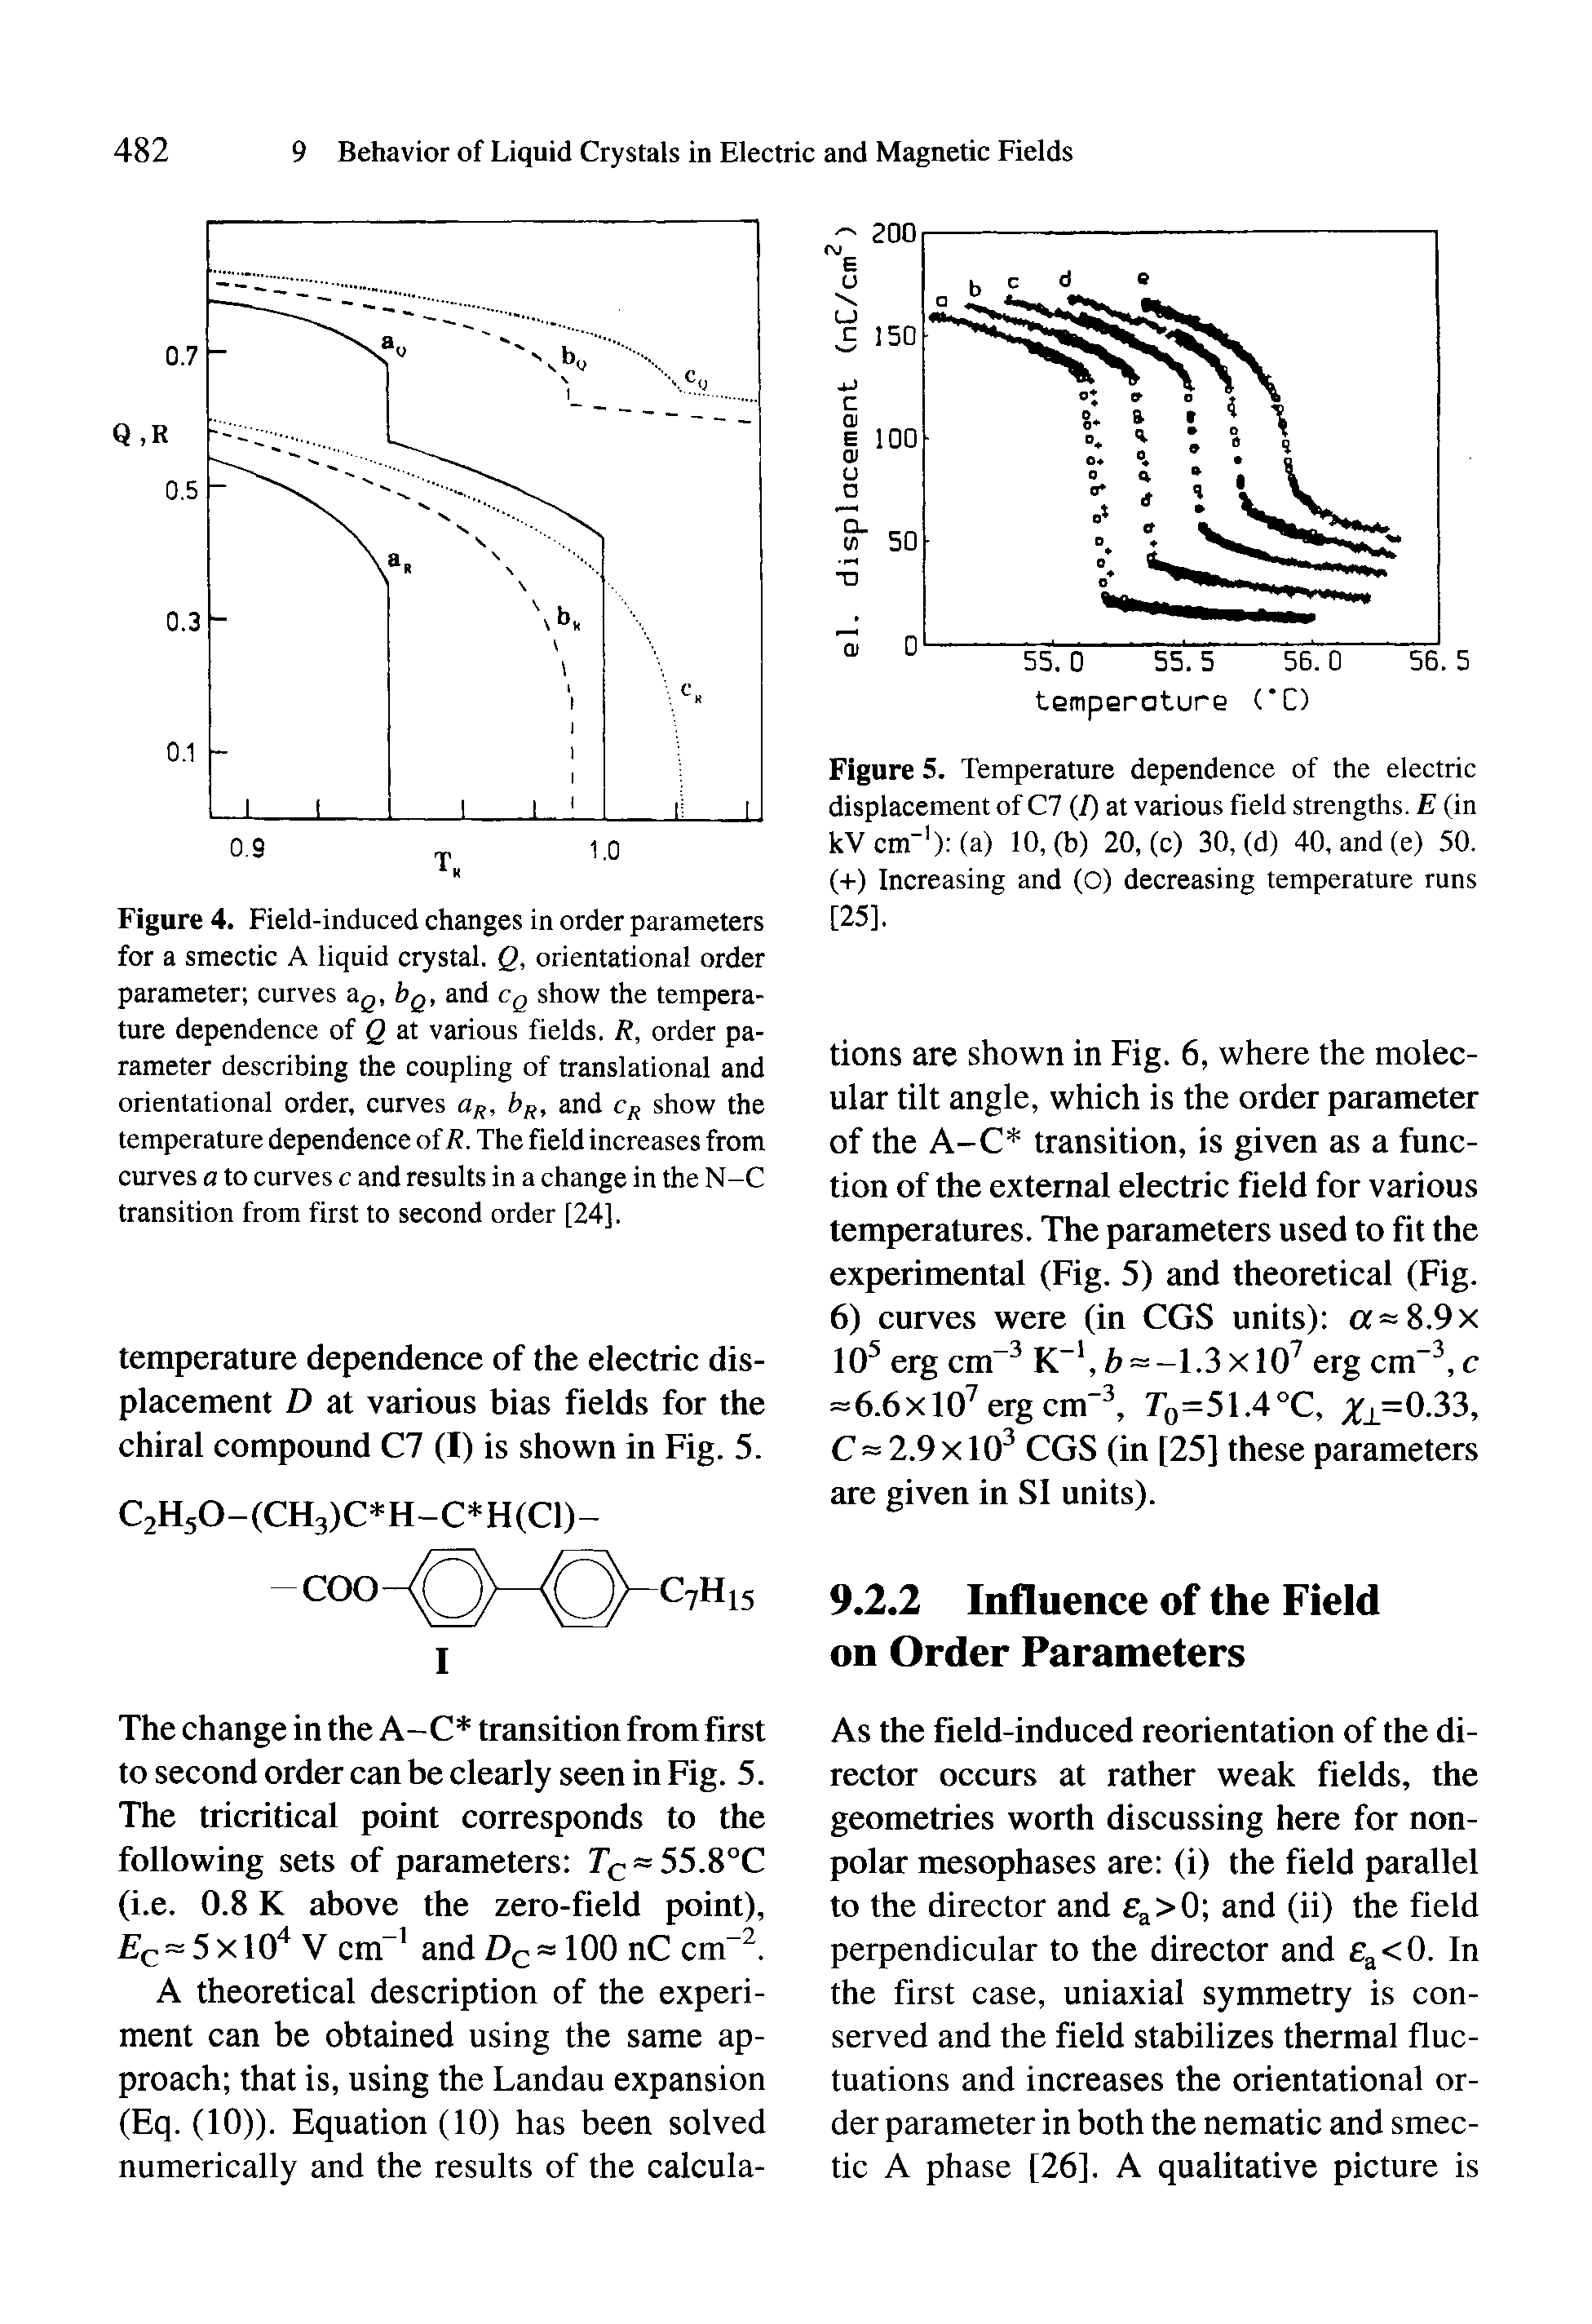 Figure 4. Field-induced changes in order parameters for a smectic A liquid crystal. Q, orientational order parameter curves ag, bg, and cq show the temperature dependence of Q at various fields. R, order parameter describing the coupling of translational and orientational order, curves Ug, b, and show the temperature dependence of R. The field increases from curves a to curves c and results in a change in the N-C transition from first to second order [24],...